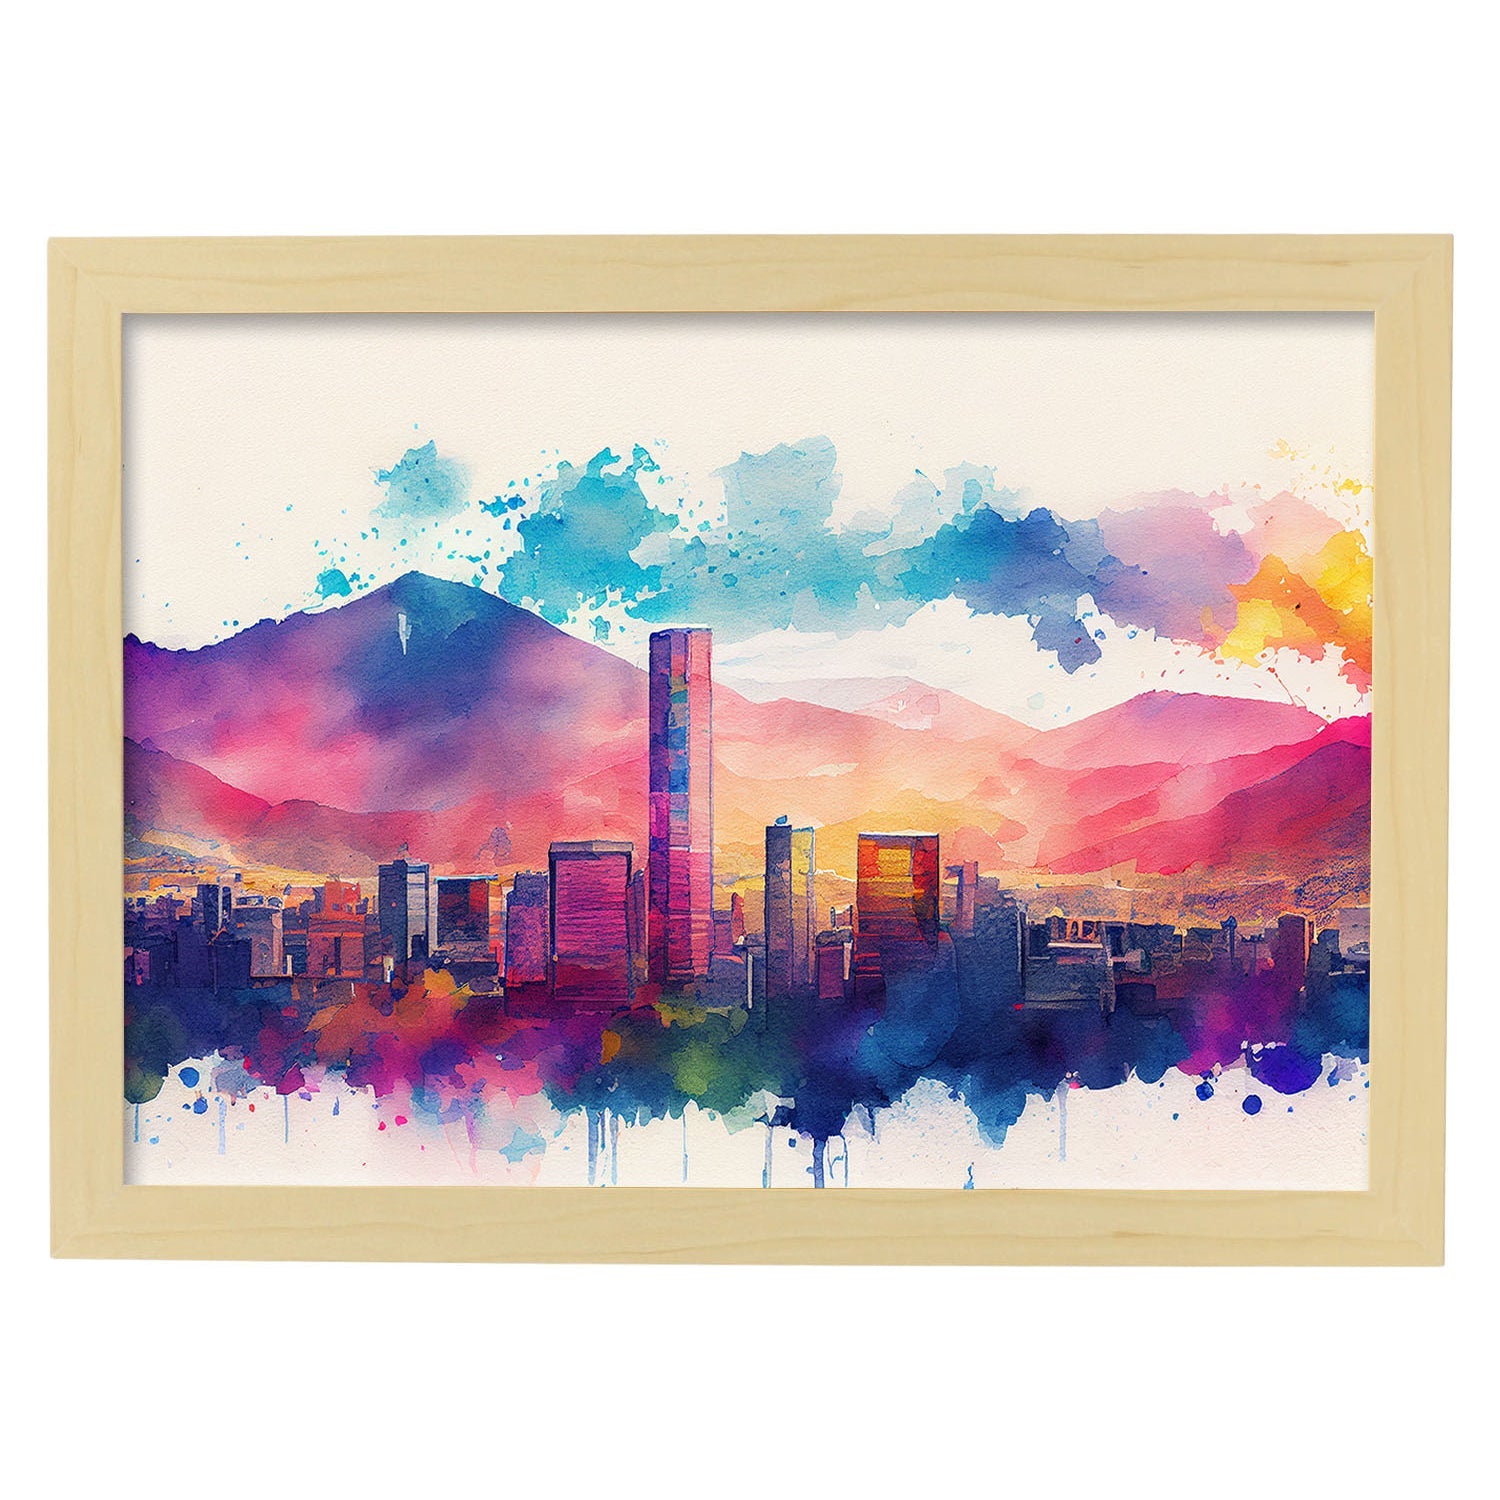 Nacnic watercolor of a skyline of the city of Bogota. Aesthetic Wall Art Prints for Bedroom or Living Room Design.-Artwork-Nacnic-A4-Marco Madera Clara-Nacnic Estudio SL